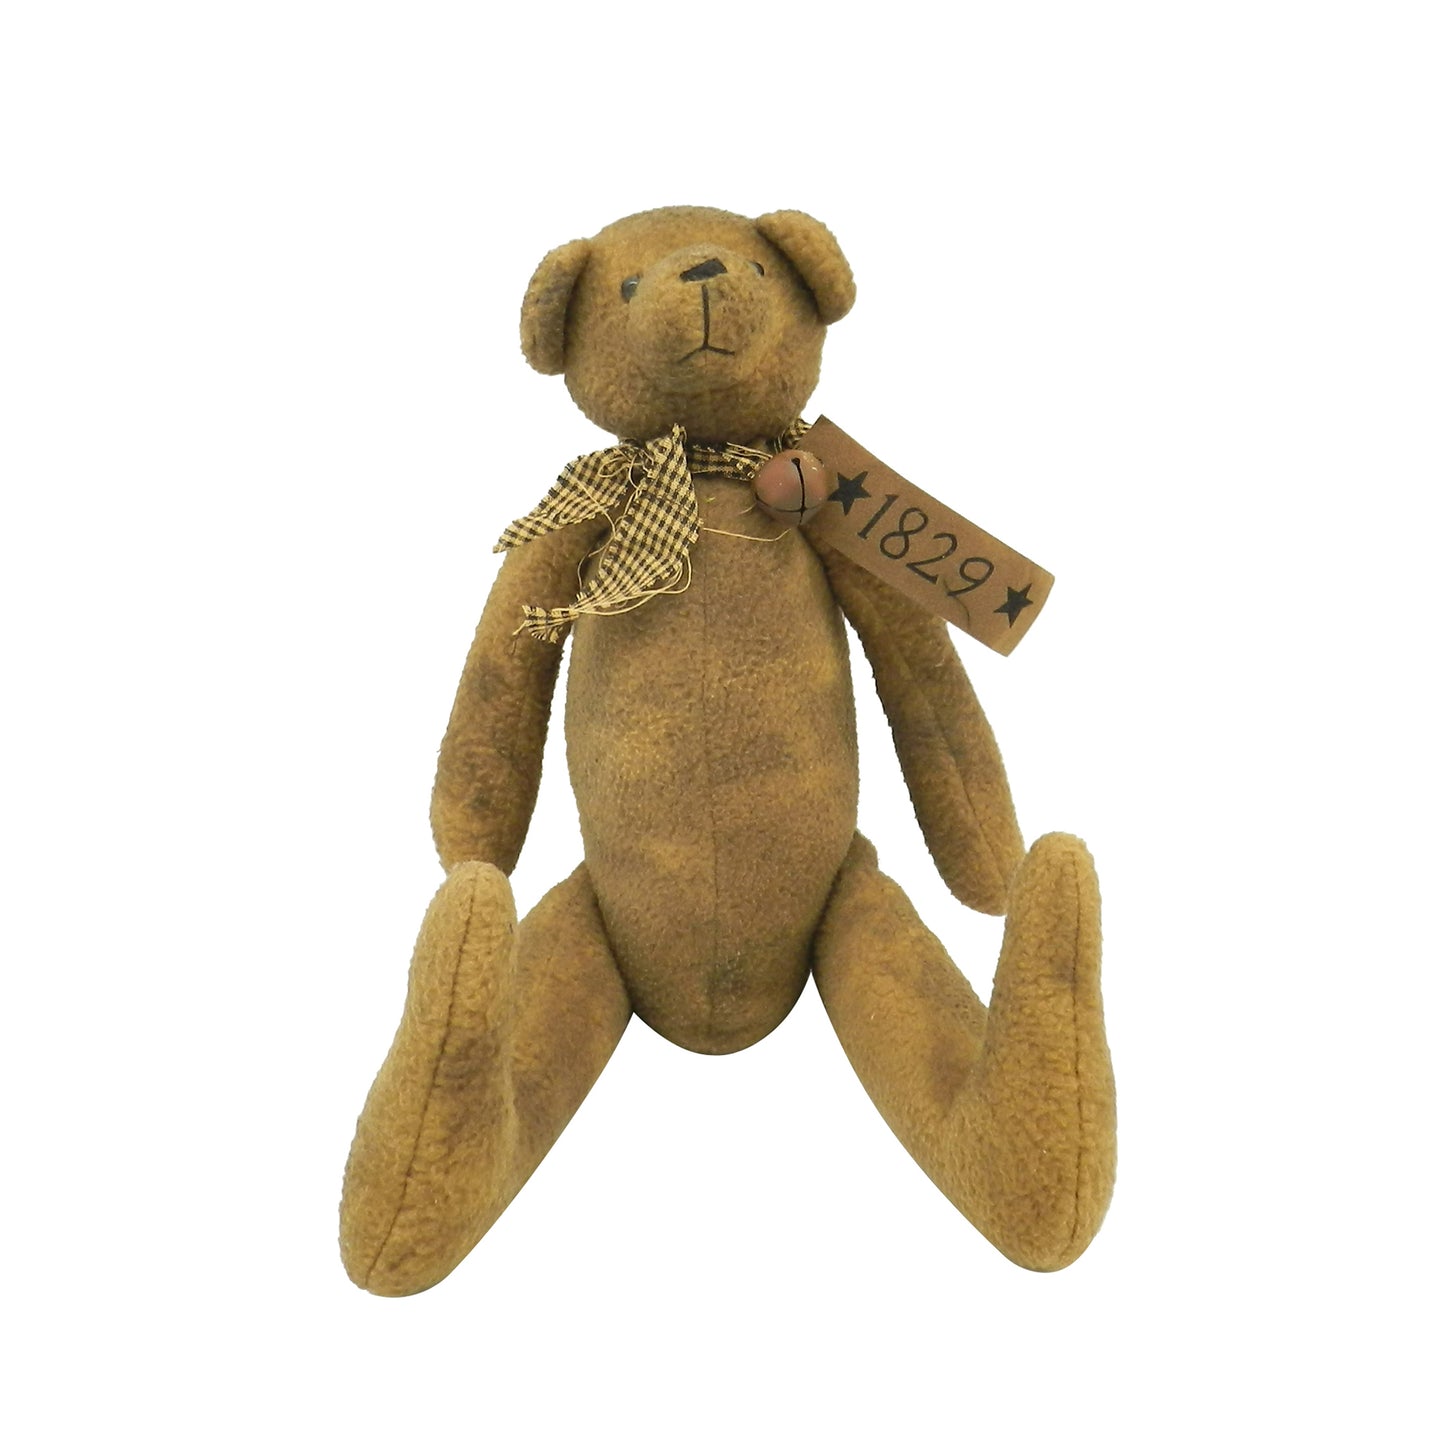 CVHOMEDECO. Vintage Grungy Stuffed Bear Ornament with Rusty Bell Collar. 17 X 11 Inch